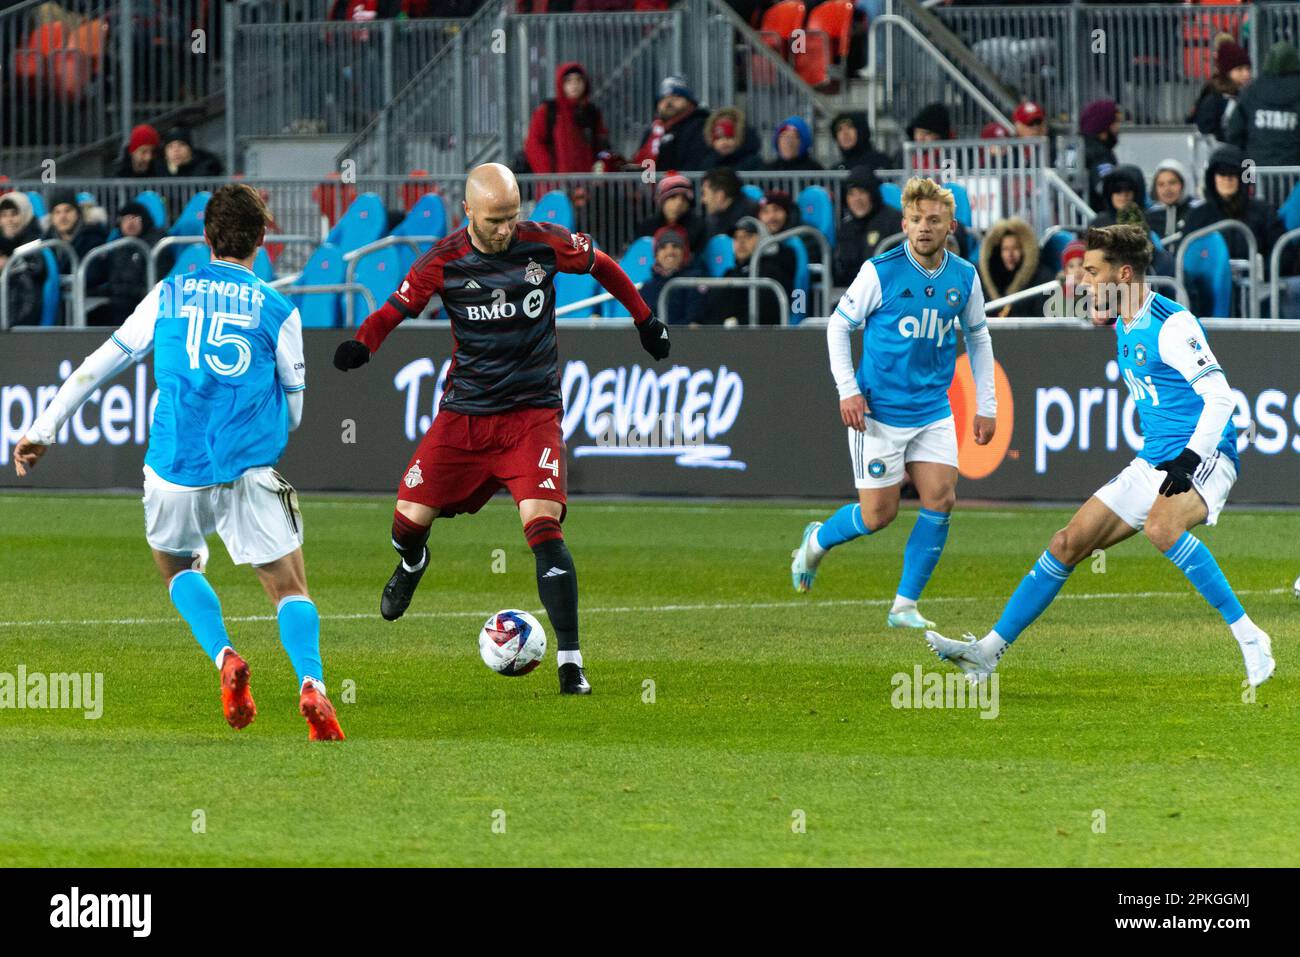 Toronto, ON, Canada - April 1:  Michael Bradley #4 midfielder of the Toronto FC dribble with the ball during the 2023 MLS Regular Season match between Stock Photo